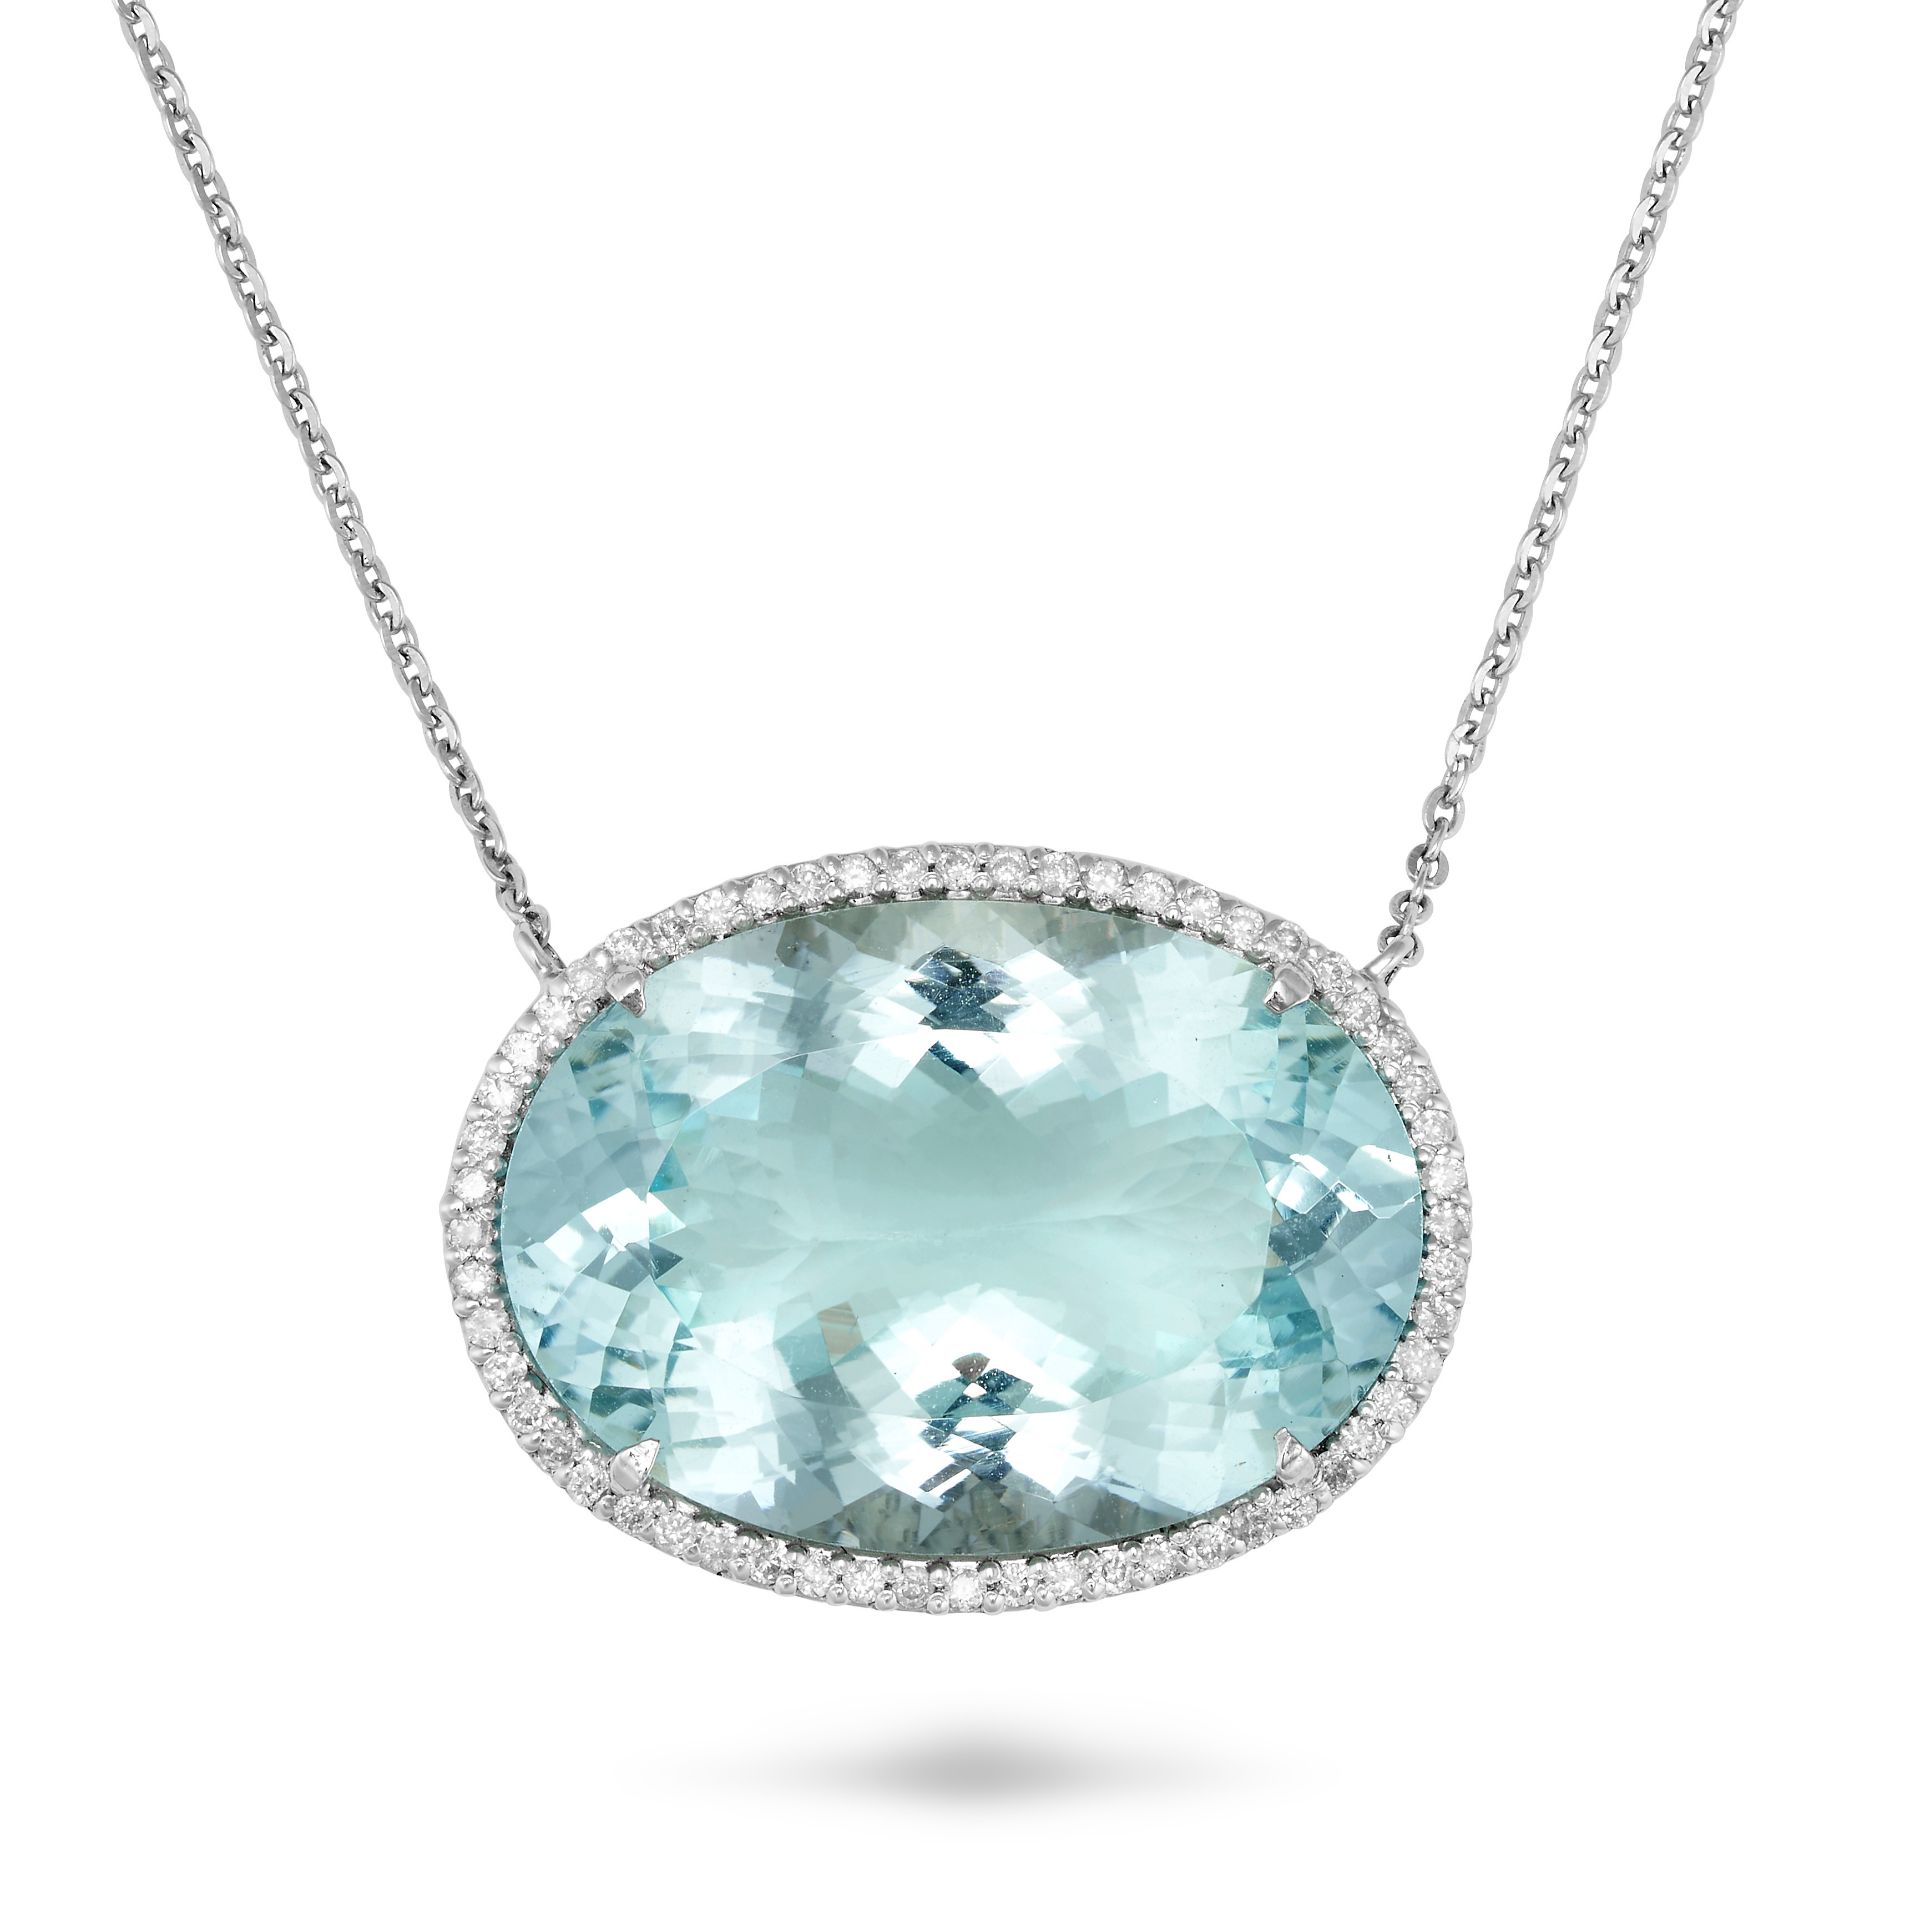 AN AQUAMARINE AND DIAMOND PENDANT NECKLACE in 18ct white gold, the pendant set with an oval cut a...